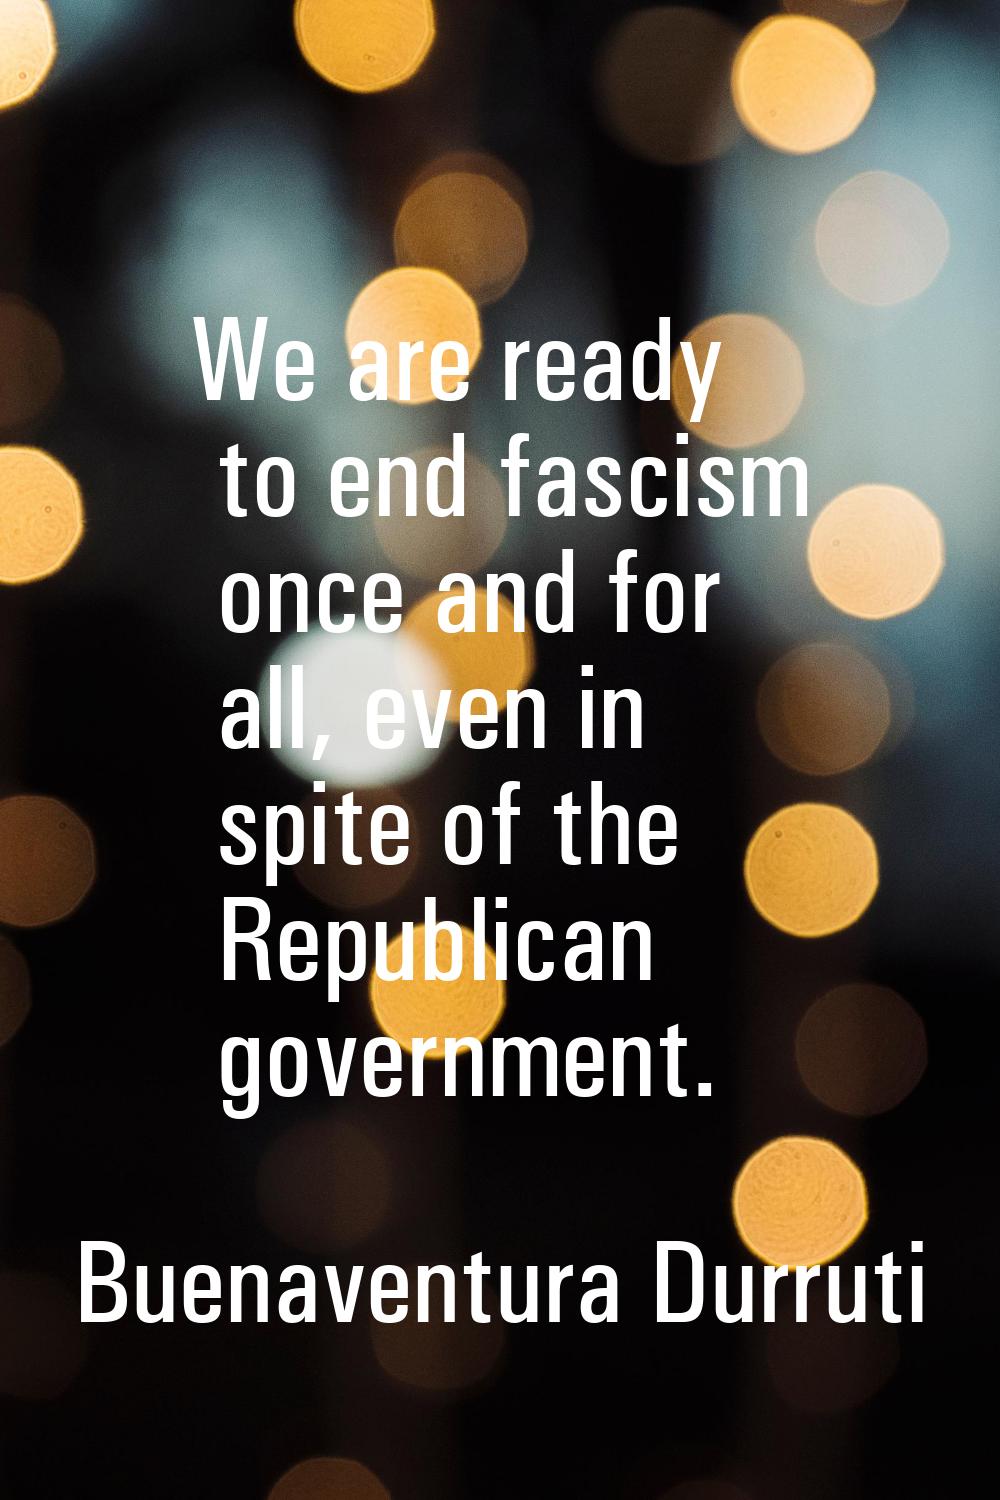 We are ready to end fascism once and for all, even in spite of the Republican government.